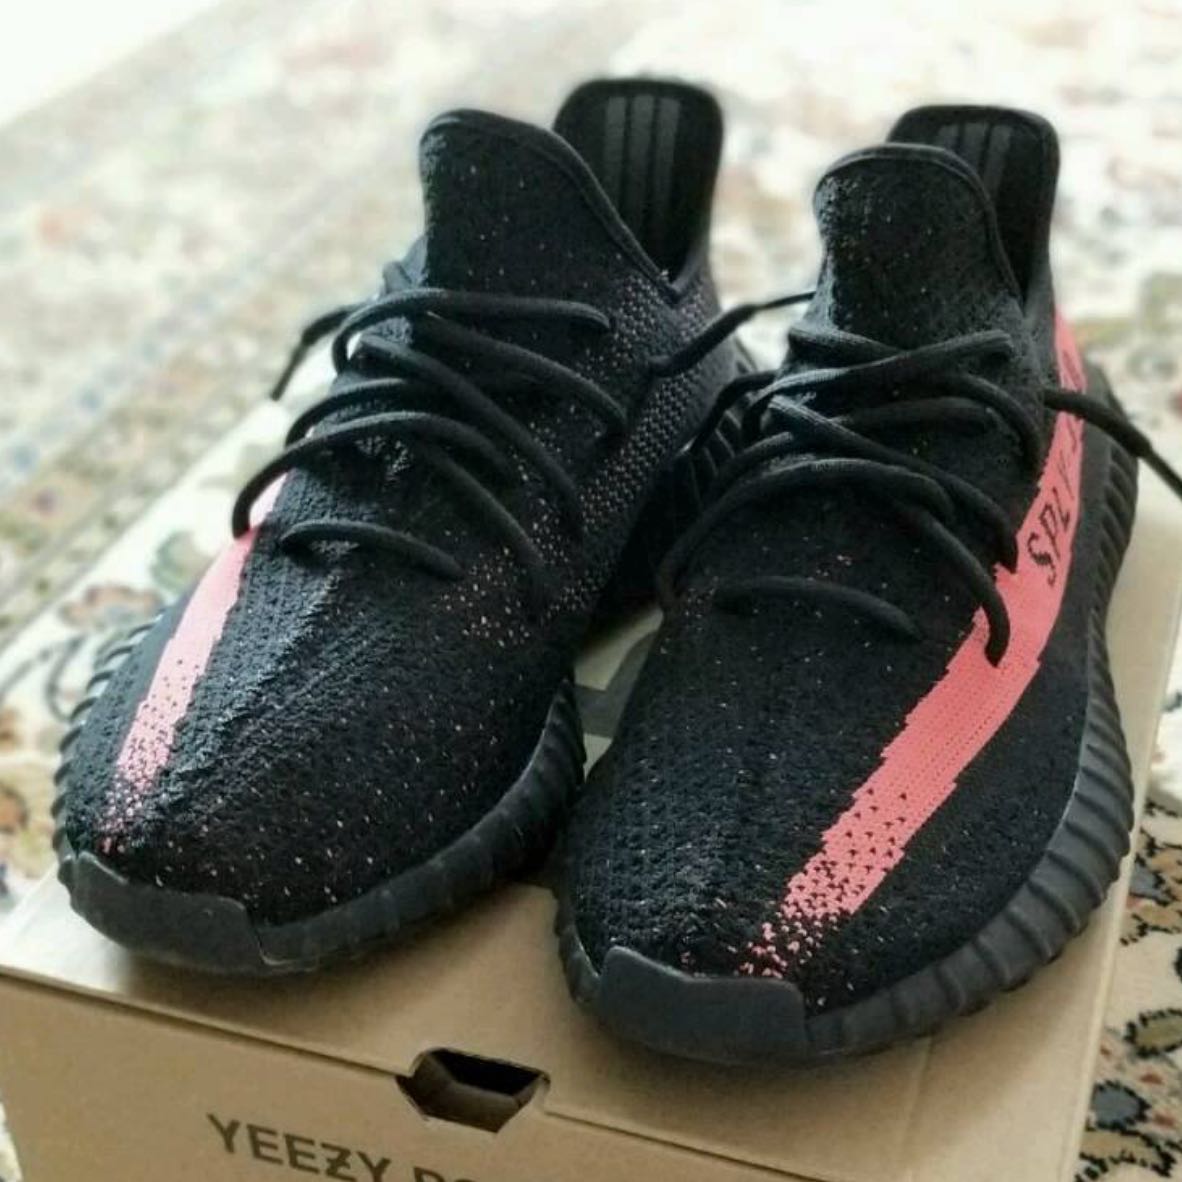 yeezy size 7.5 mens to womens